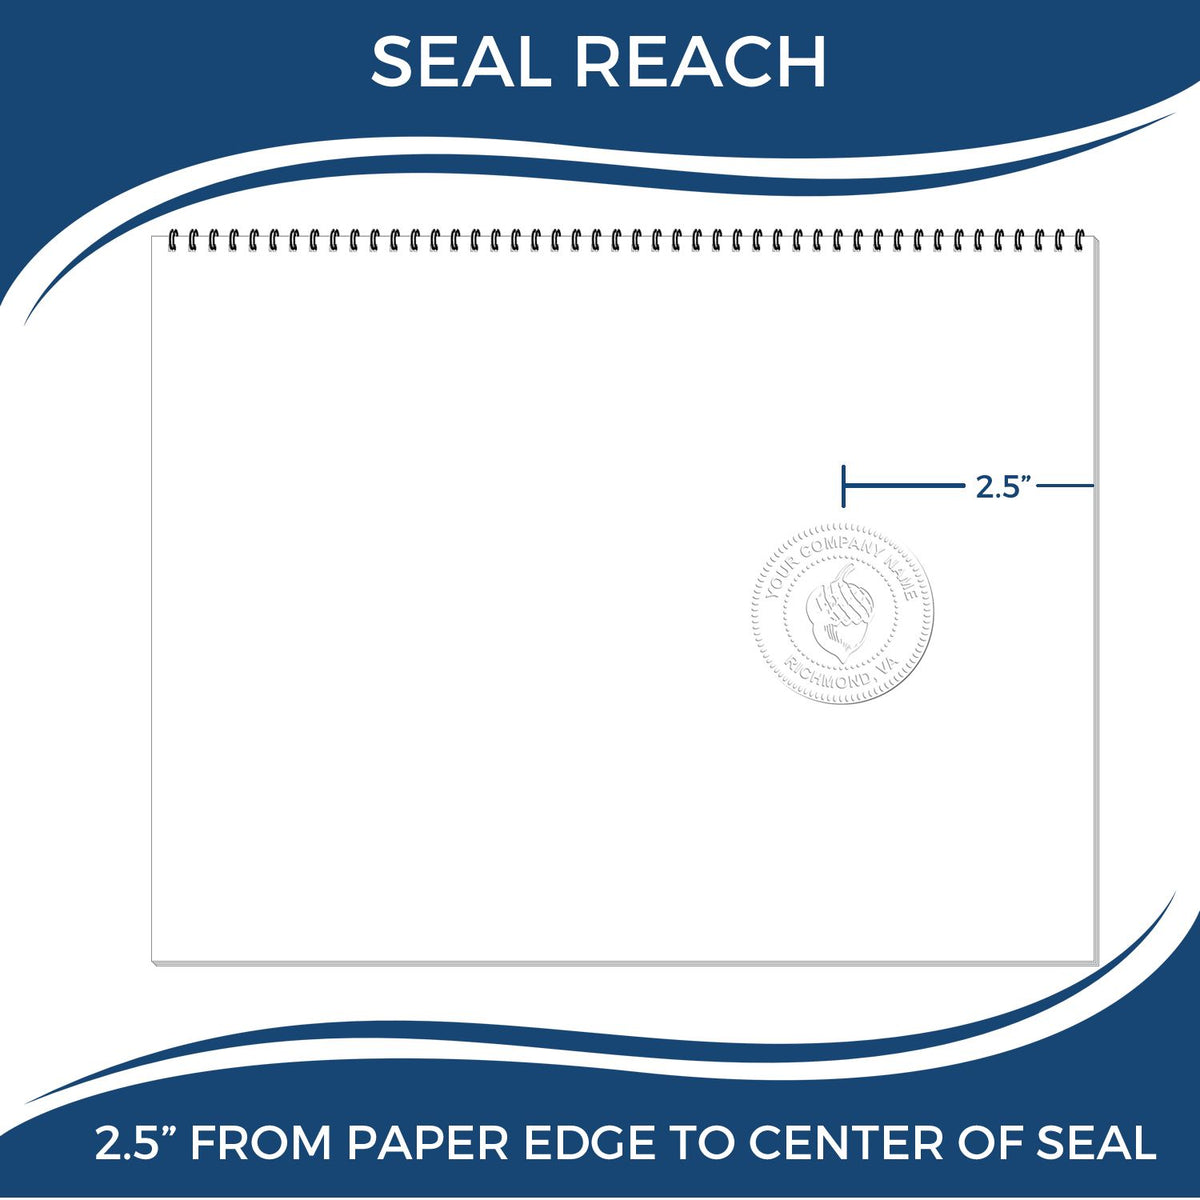 An infographic showing the seal reach which is represented by a ruler and a miniature seal image of the Heavy Duty Cast Iron Maryland Engineer Seal Embosser